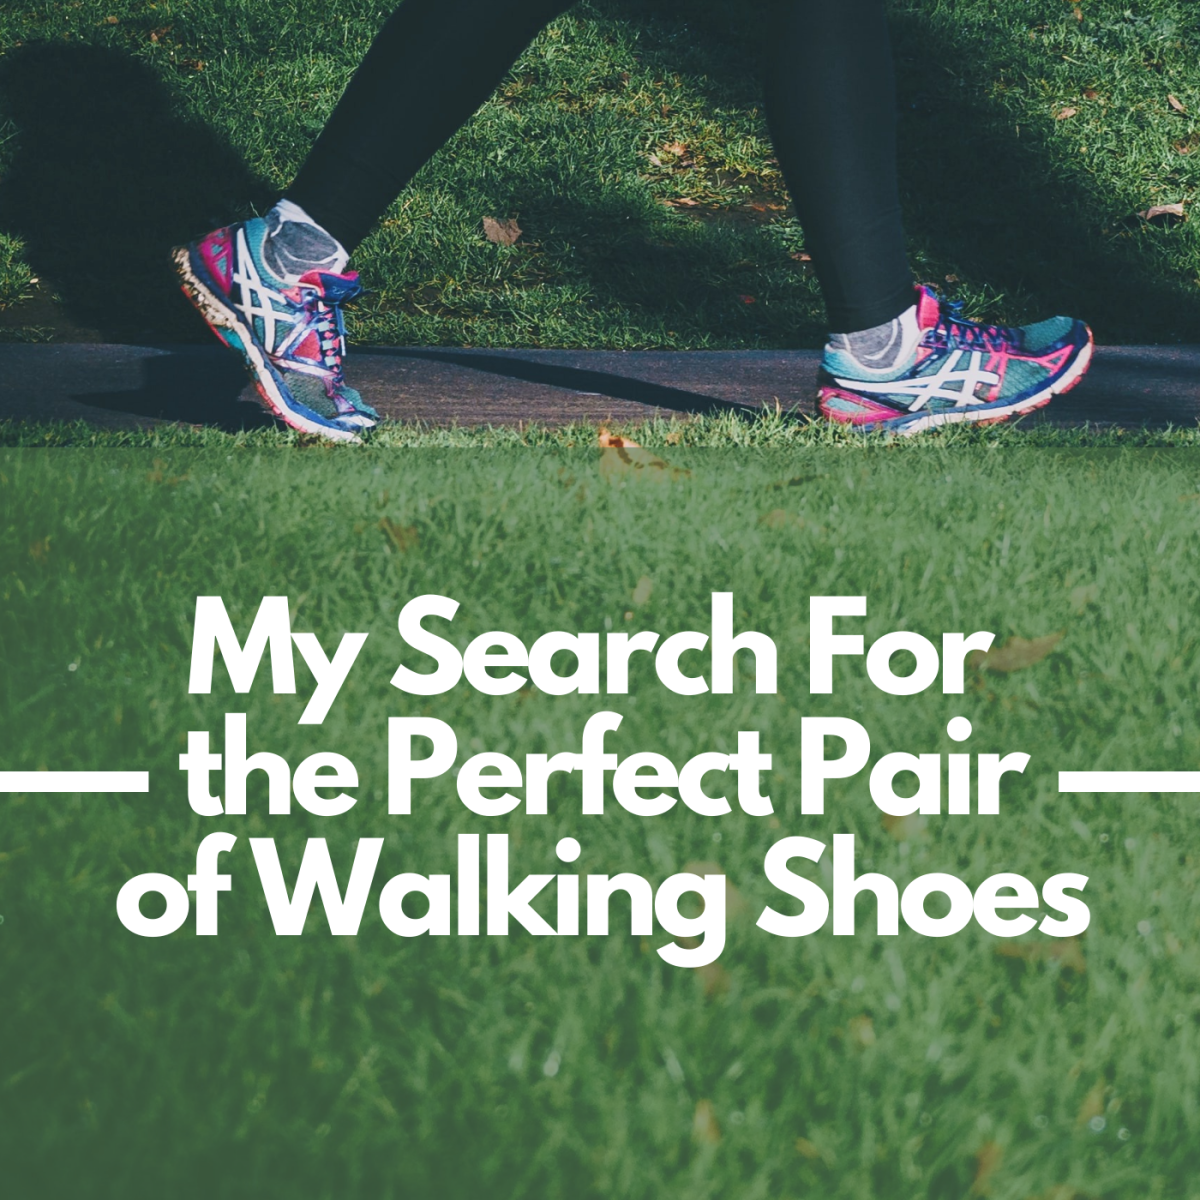 Sole Enemies to Sole Mates: My Journey to Find the Best Walking Shoe